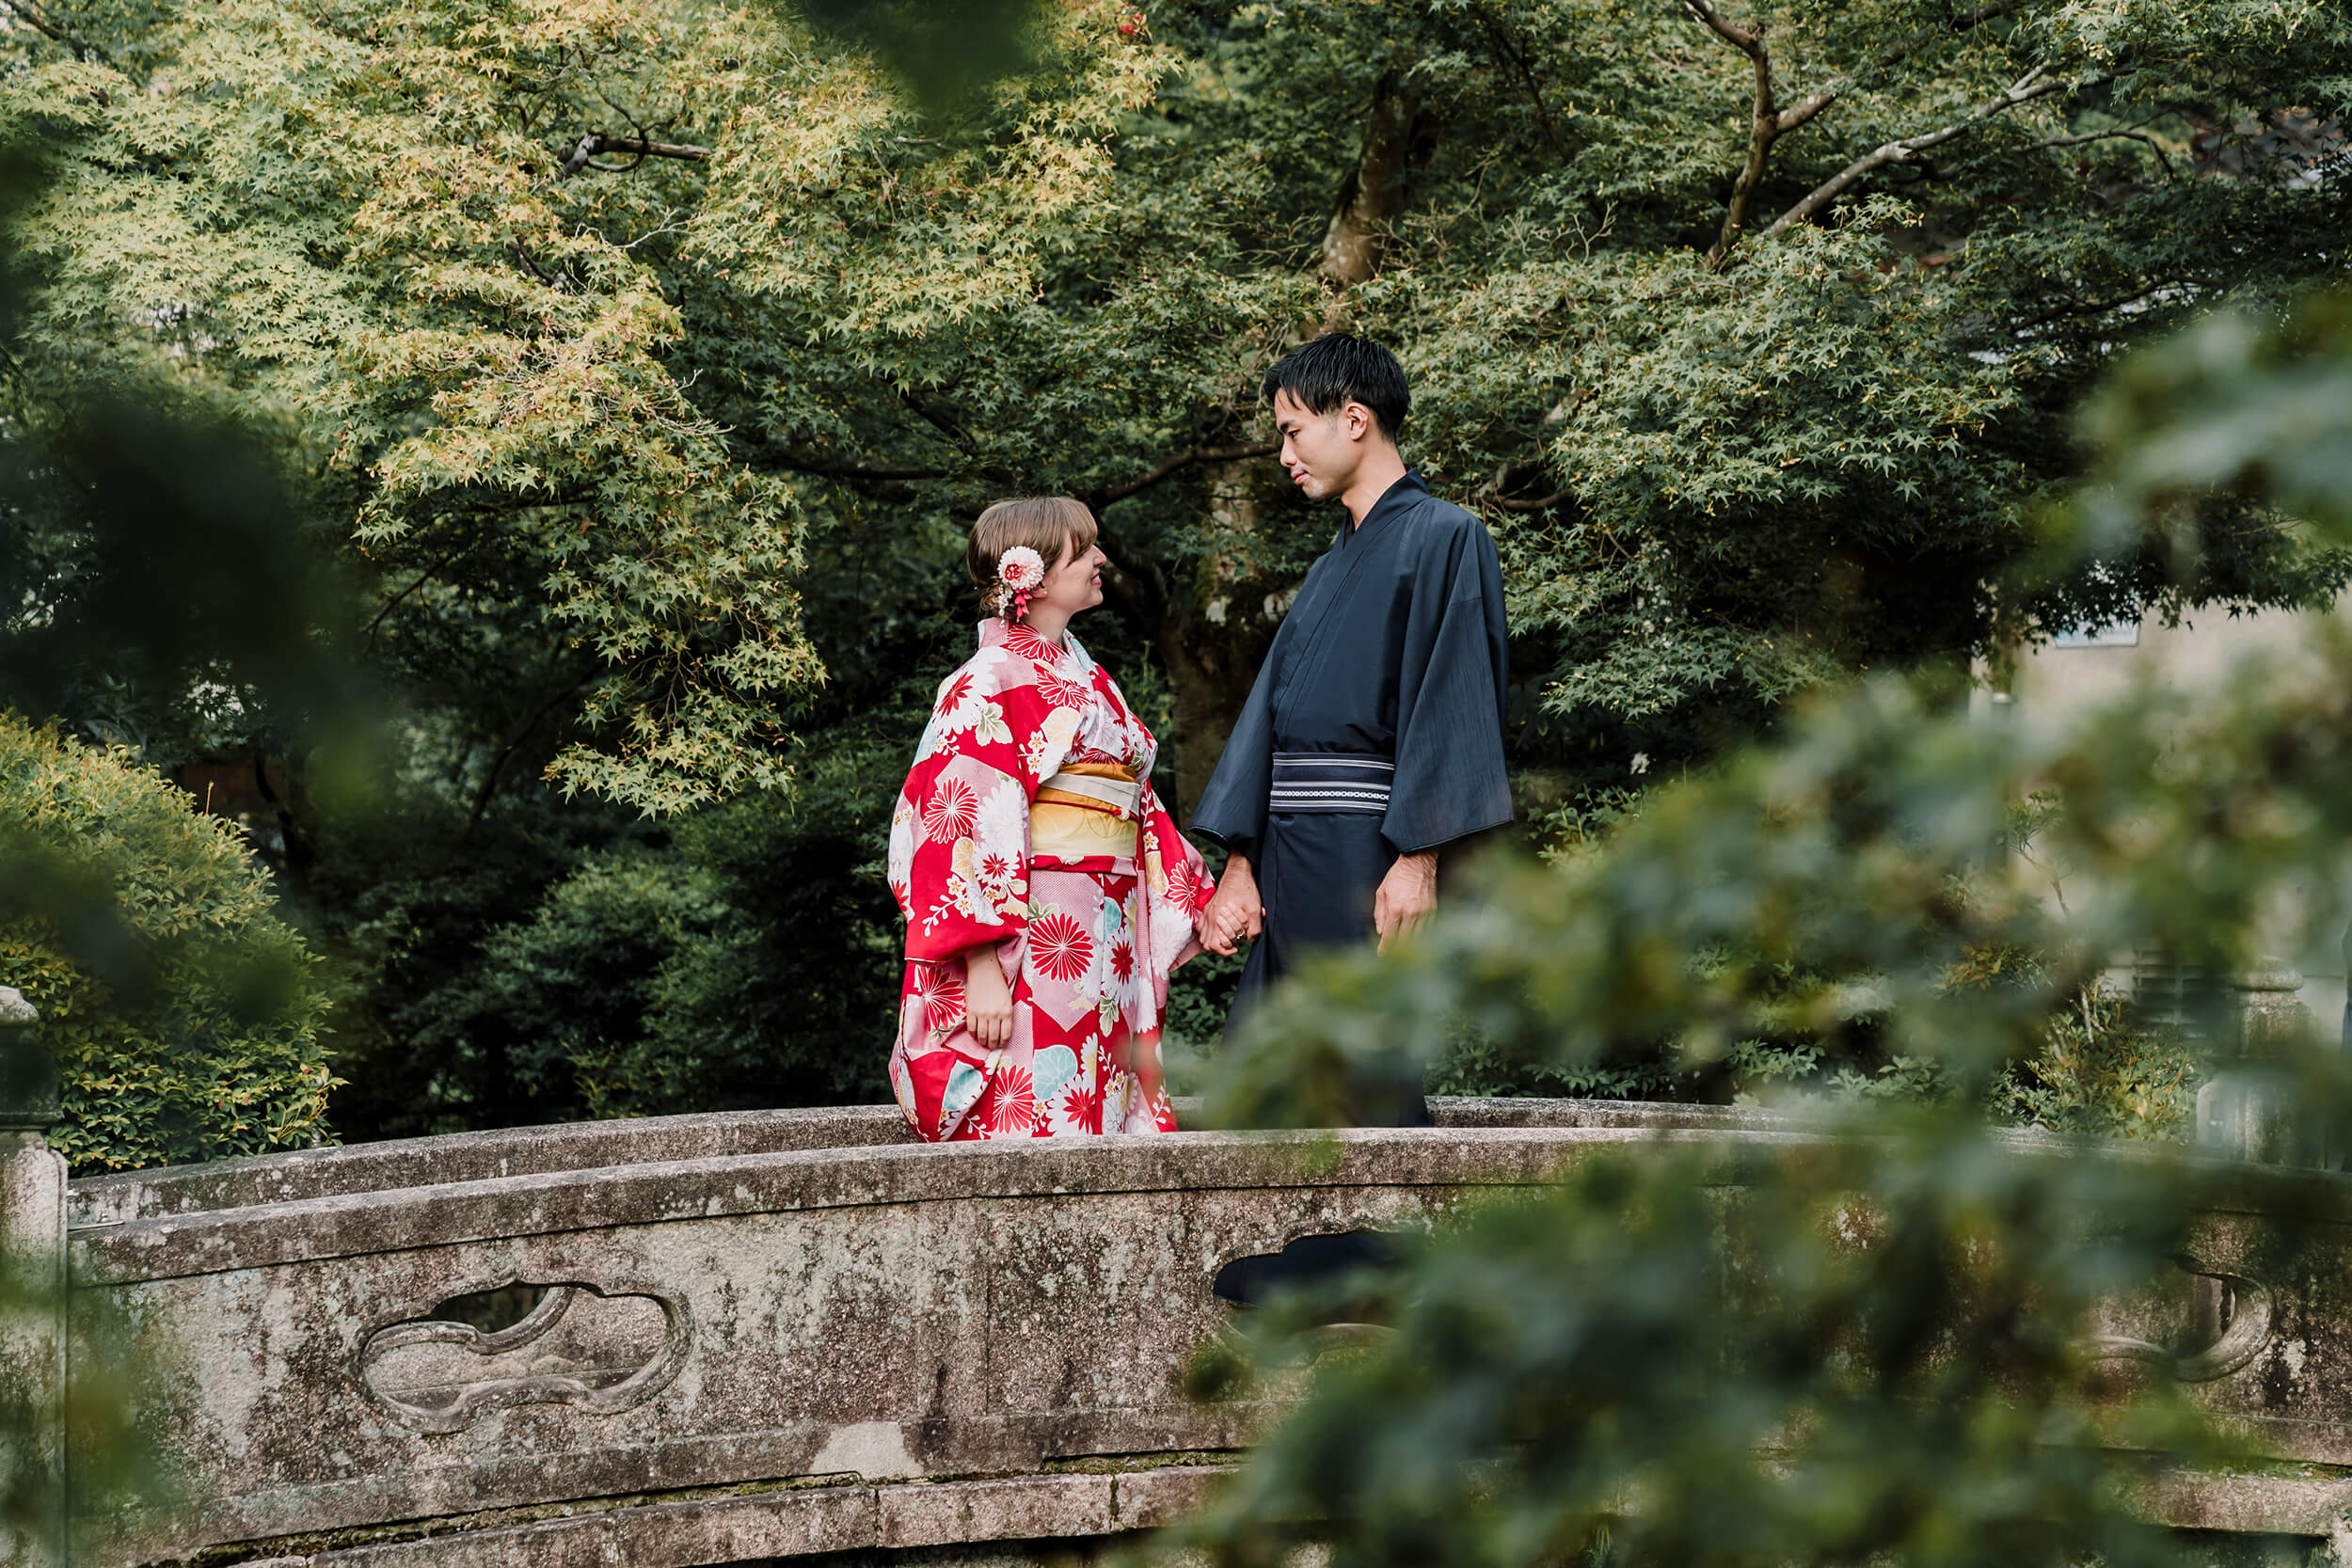 A traditional Japanese outfit worn by the couple for their engagement shoot